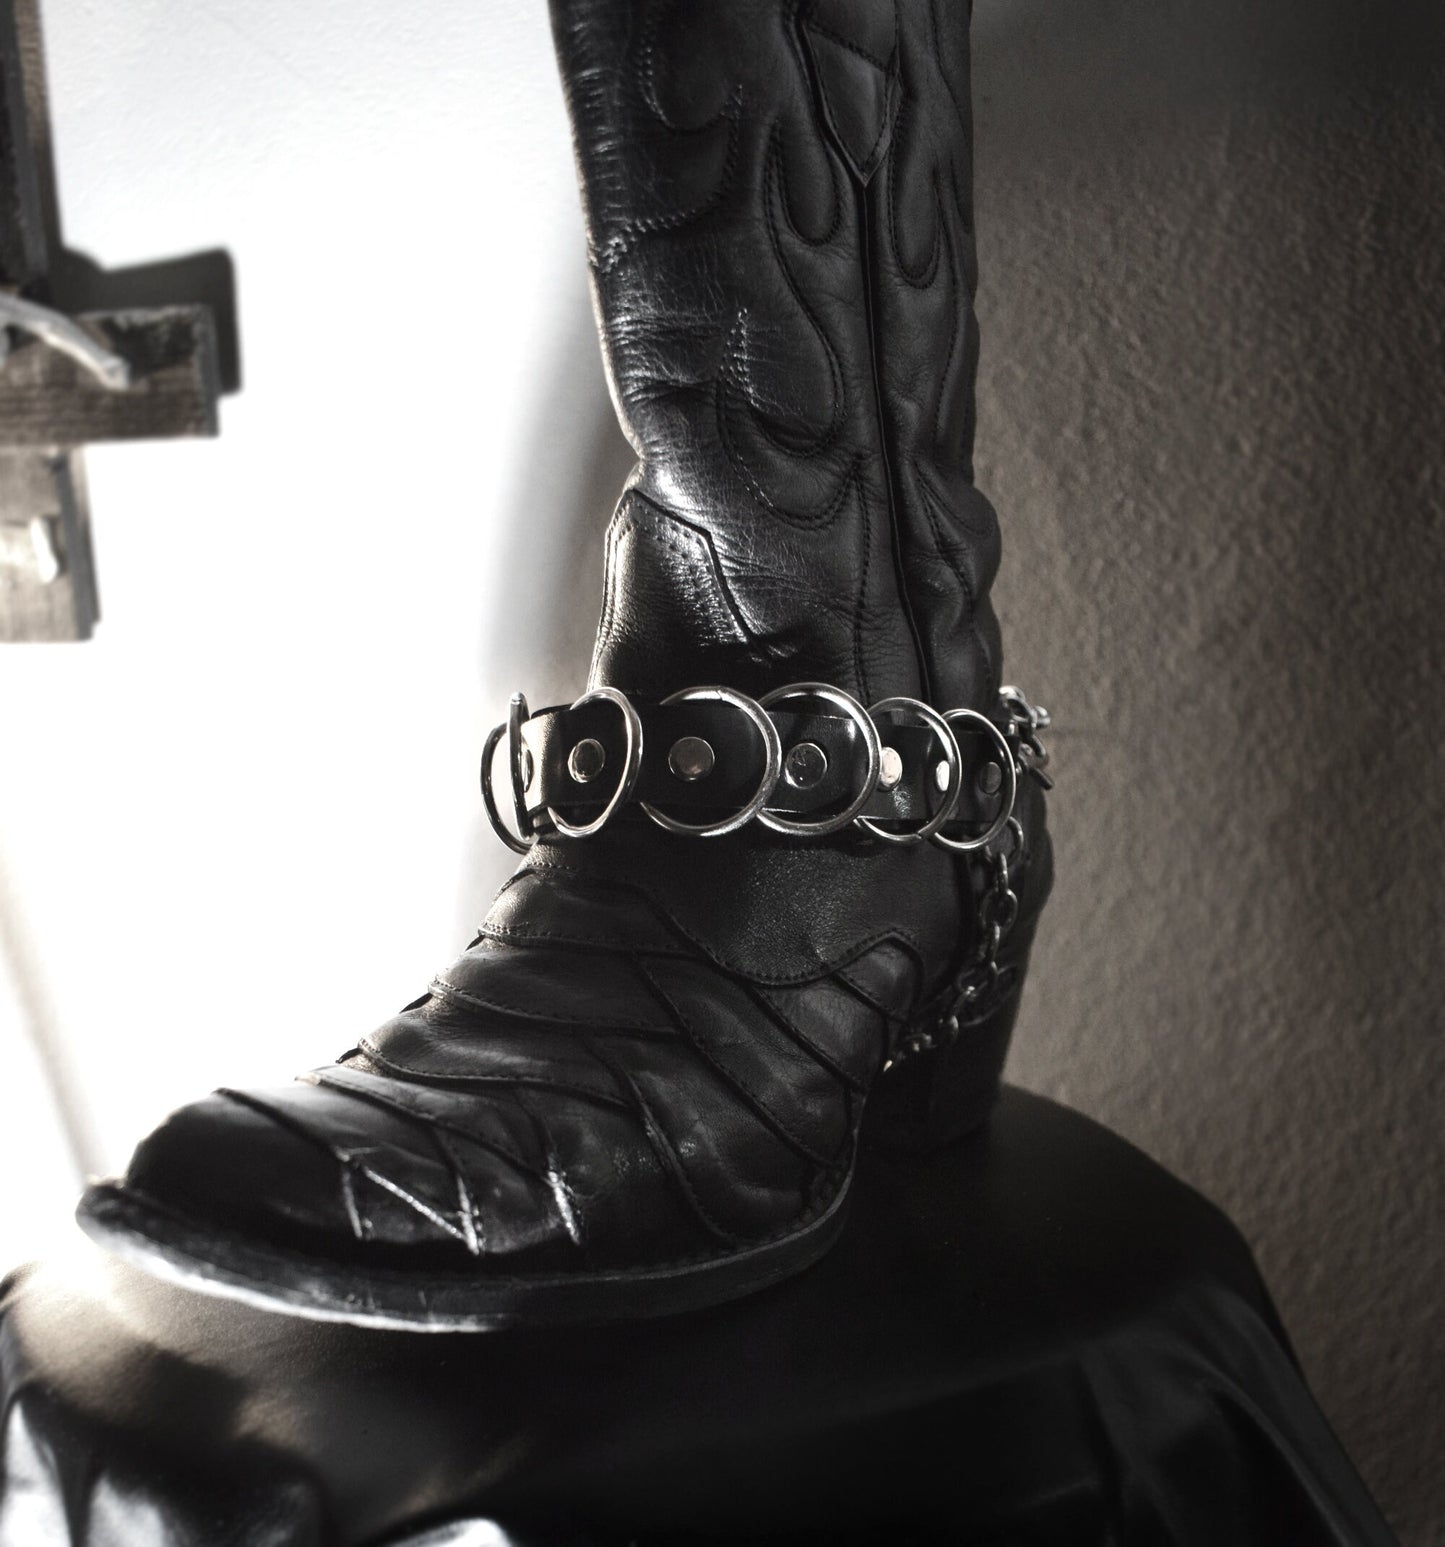 Handmade O-ring Faux leather strap boot ⇹ Vegan leather rings harness ⇹ chain rings strap boots